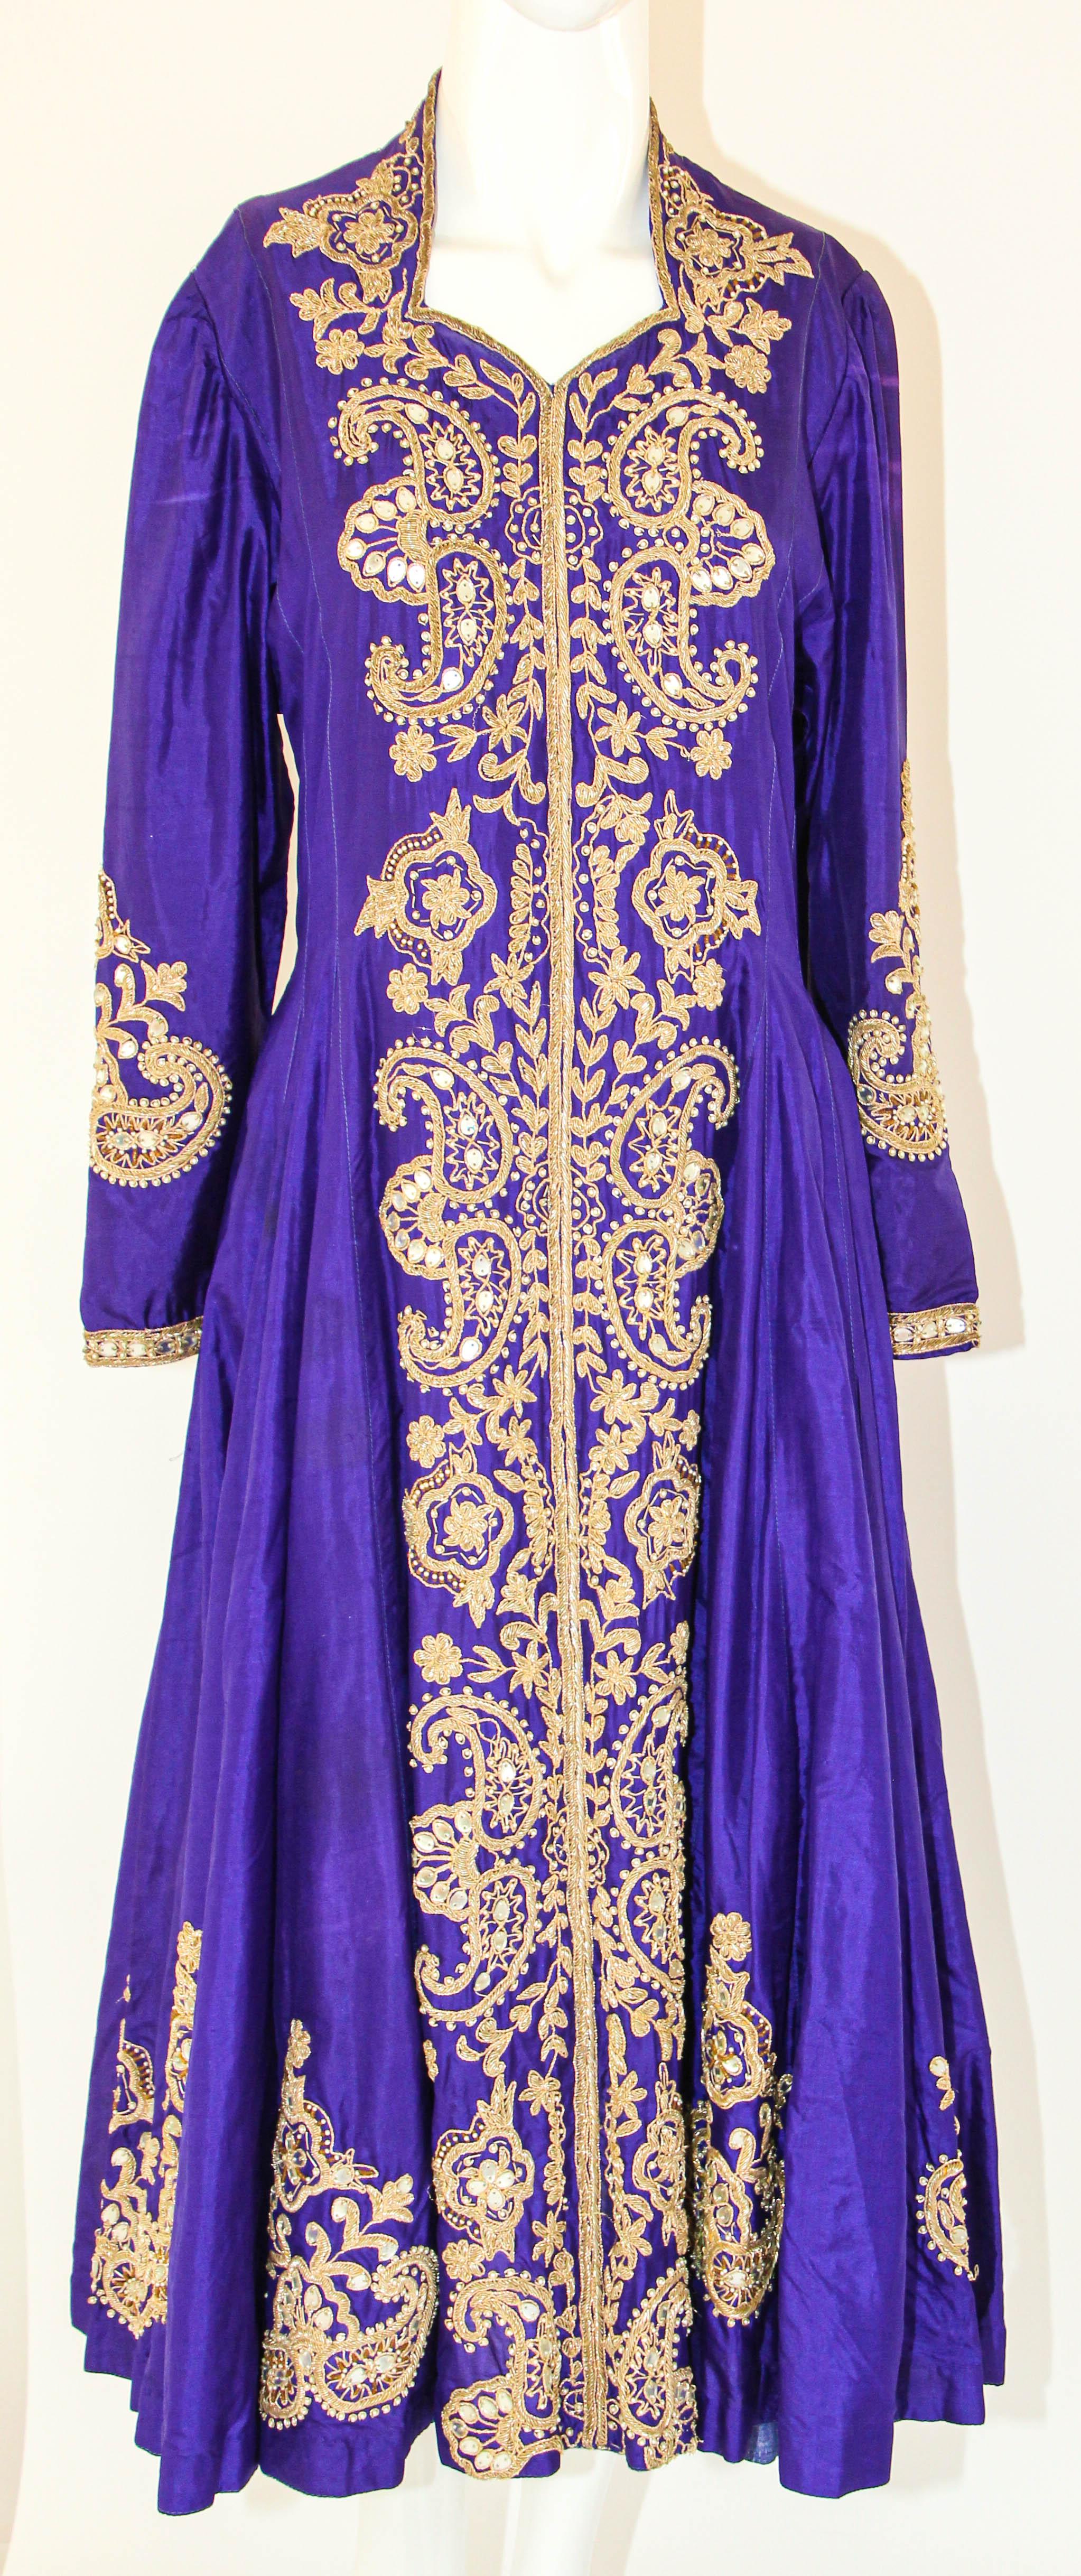 Vintage purple silk maxi dress featuring embroidered zari mor motifs highlighted with sequin work.
Purple silk wedding dress lavender evening dress coat hand embroidered kashmir India.
This luxurious Kashmir dress are world famous for their beauty